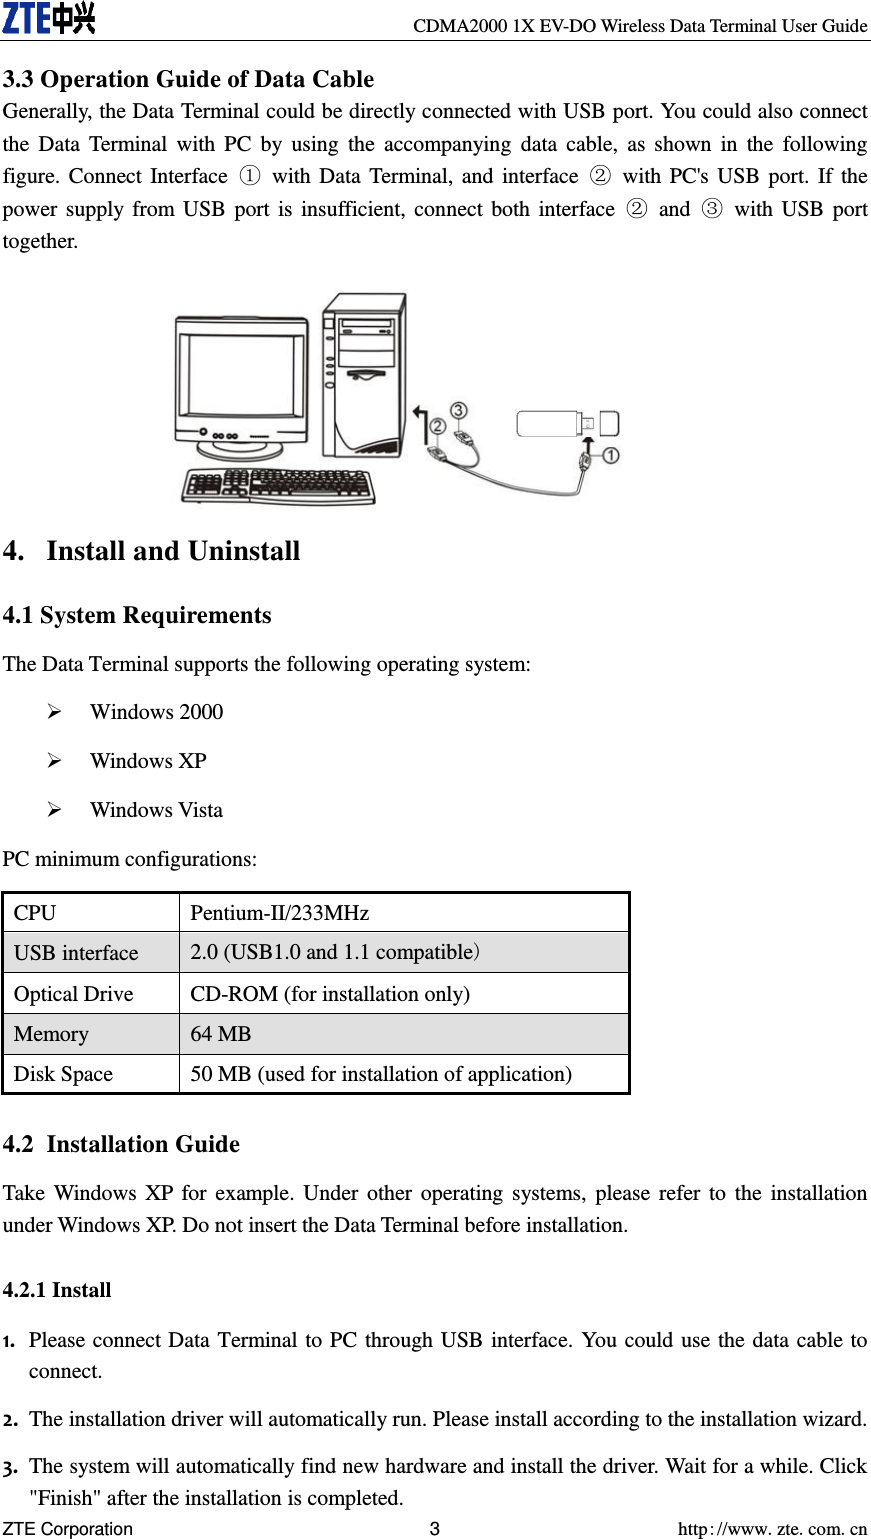     CDMA2000 1X EV-DO Wireless Data Terminal User Guide ZTE Corporation 3  http://www.zte.com.cn  3.3 Operation Guide of Data Cable Generally, the Data Terminal could be directly connected with USB port. You could also connect the  Data Terminal  with PC  by  using  the  accompanying  data  cable,  as shown  in  the  following figure. Connect Interface  ①  with Data Terminal, and  interface  ②  with PC&apos;s USB port. If the power supply from USB  port is insufficient, connect both interface  ②  and  ③  with USB port together.         4. Install and Uninstall 4.1 System Requirements The Data Terminal supports the following operating system:  Windows 2000  Windows XP  Windows Vista PC minimum configurations: CPU Pentium-II/233MHz USB interface   2.0 (USB1.0 and 1.1 compatible) Optical Drive   CD-ROM (for installation only)   Memory   64 MB   Disk Space   50 MB (used for installation of application)  4.2 Installation Guide Take Windows XP for example. Under other operating systems, please refer to the  installation under Windows XP. Do not insert the Data Terminal before installation. 4.2.1 Install 1. Please connect Data Terminal to PC through USB interface. You could use the data cable to connect. 2. The installation driver will automatically run. Please install according to the installation wizard. 3. The system will automatically find new hardware and install the driver. Wait for a while. Click &quot;Finish&quot; after the installation is completed. 